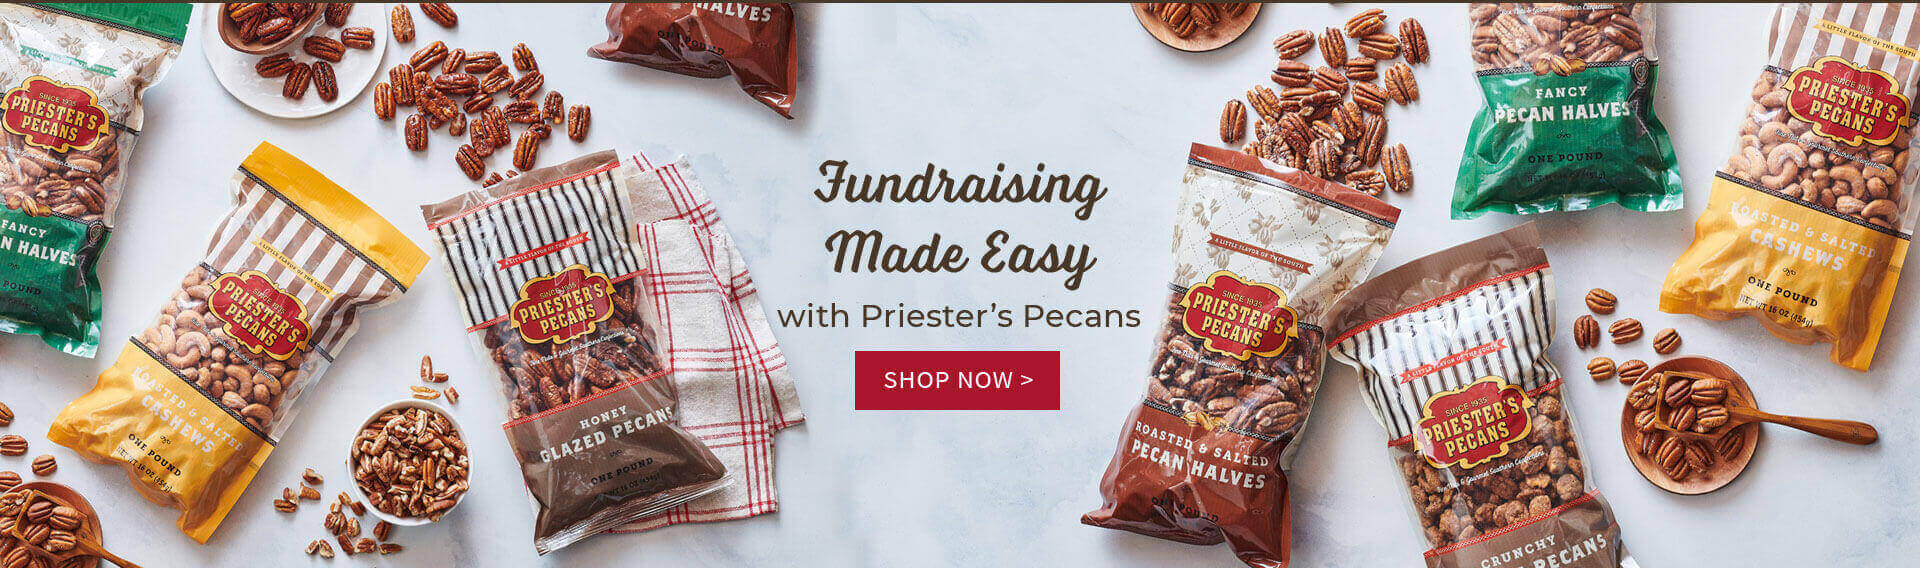 Fundraising Made Easy with Priester's Pecans - Shop Now